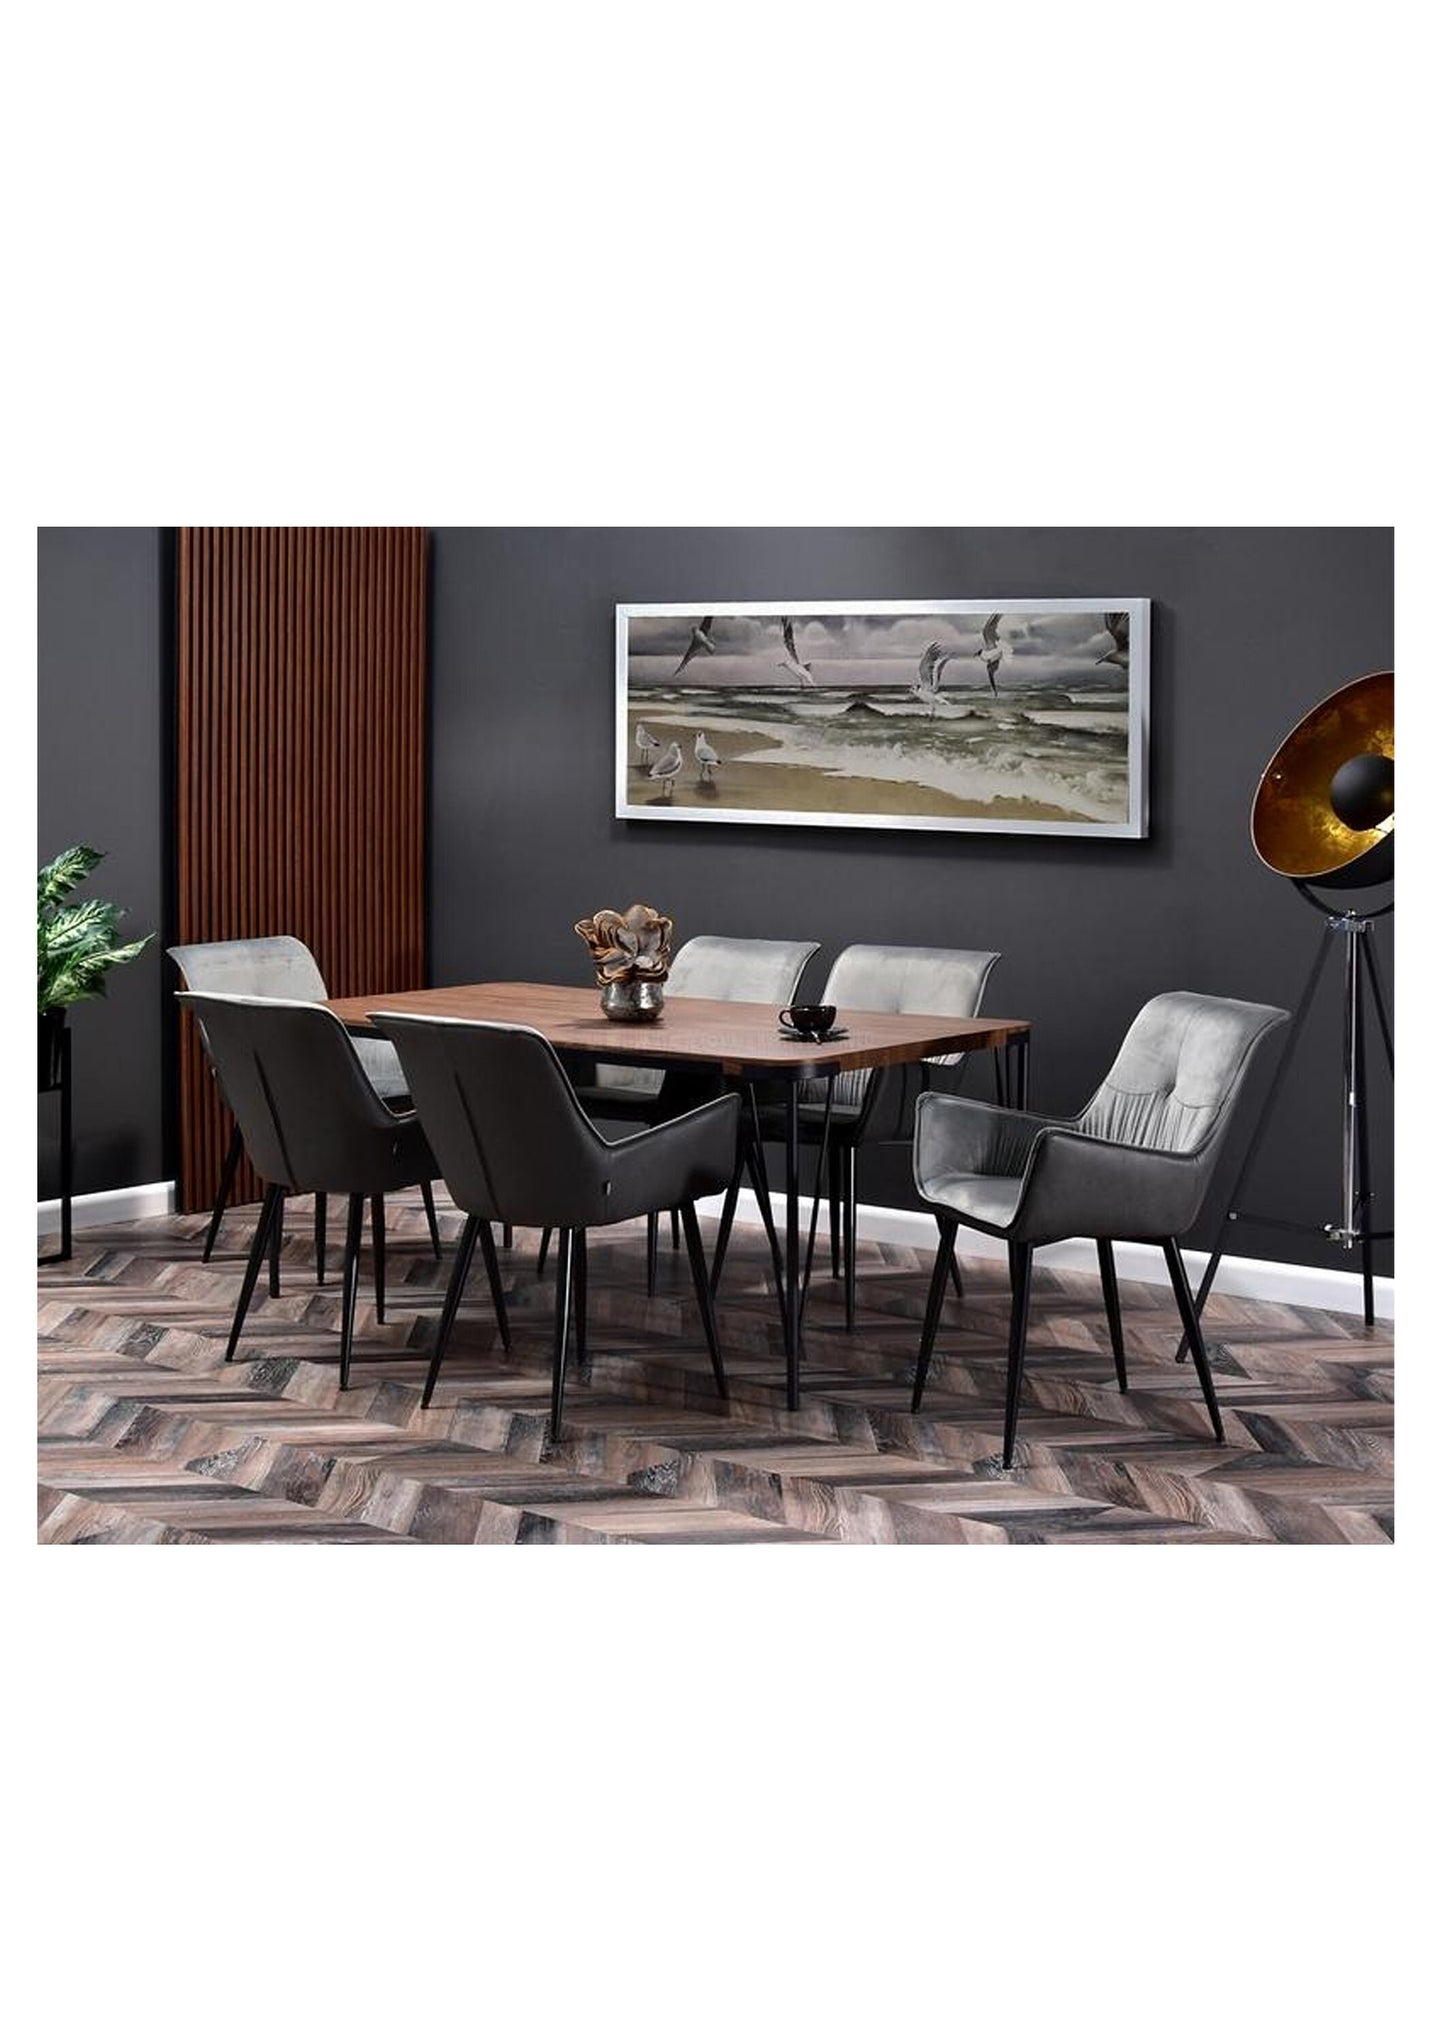 Stylish Grey Velvet and Faux Leather Dining Chair